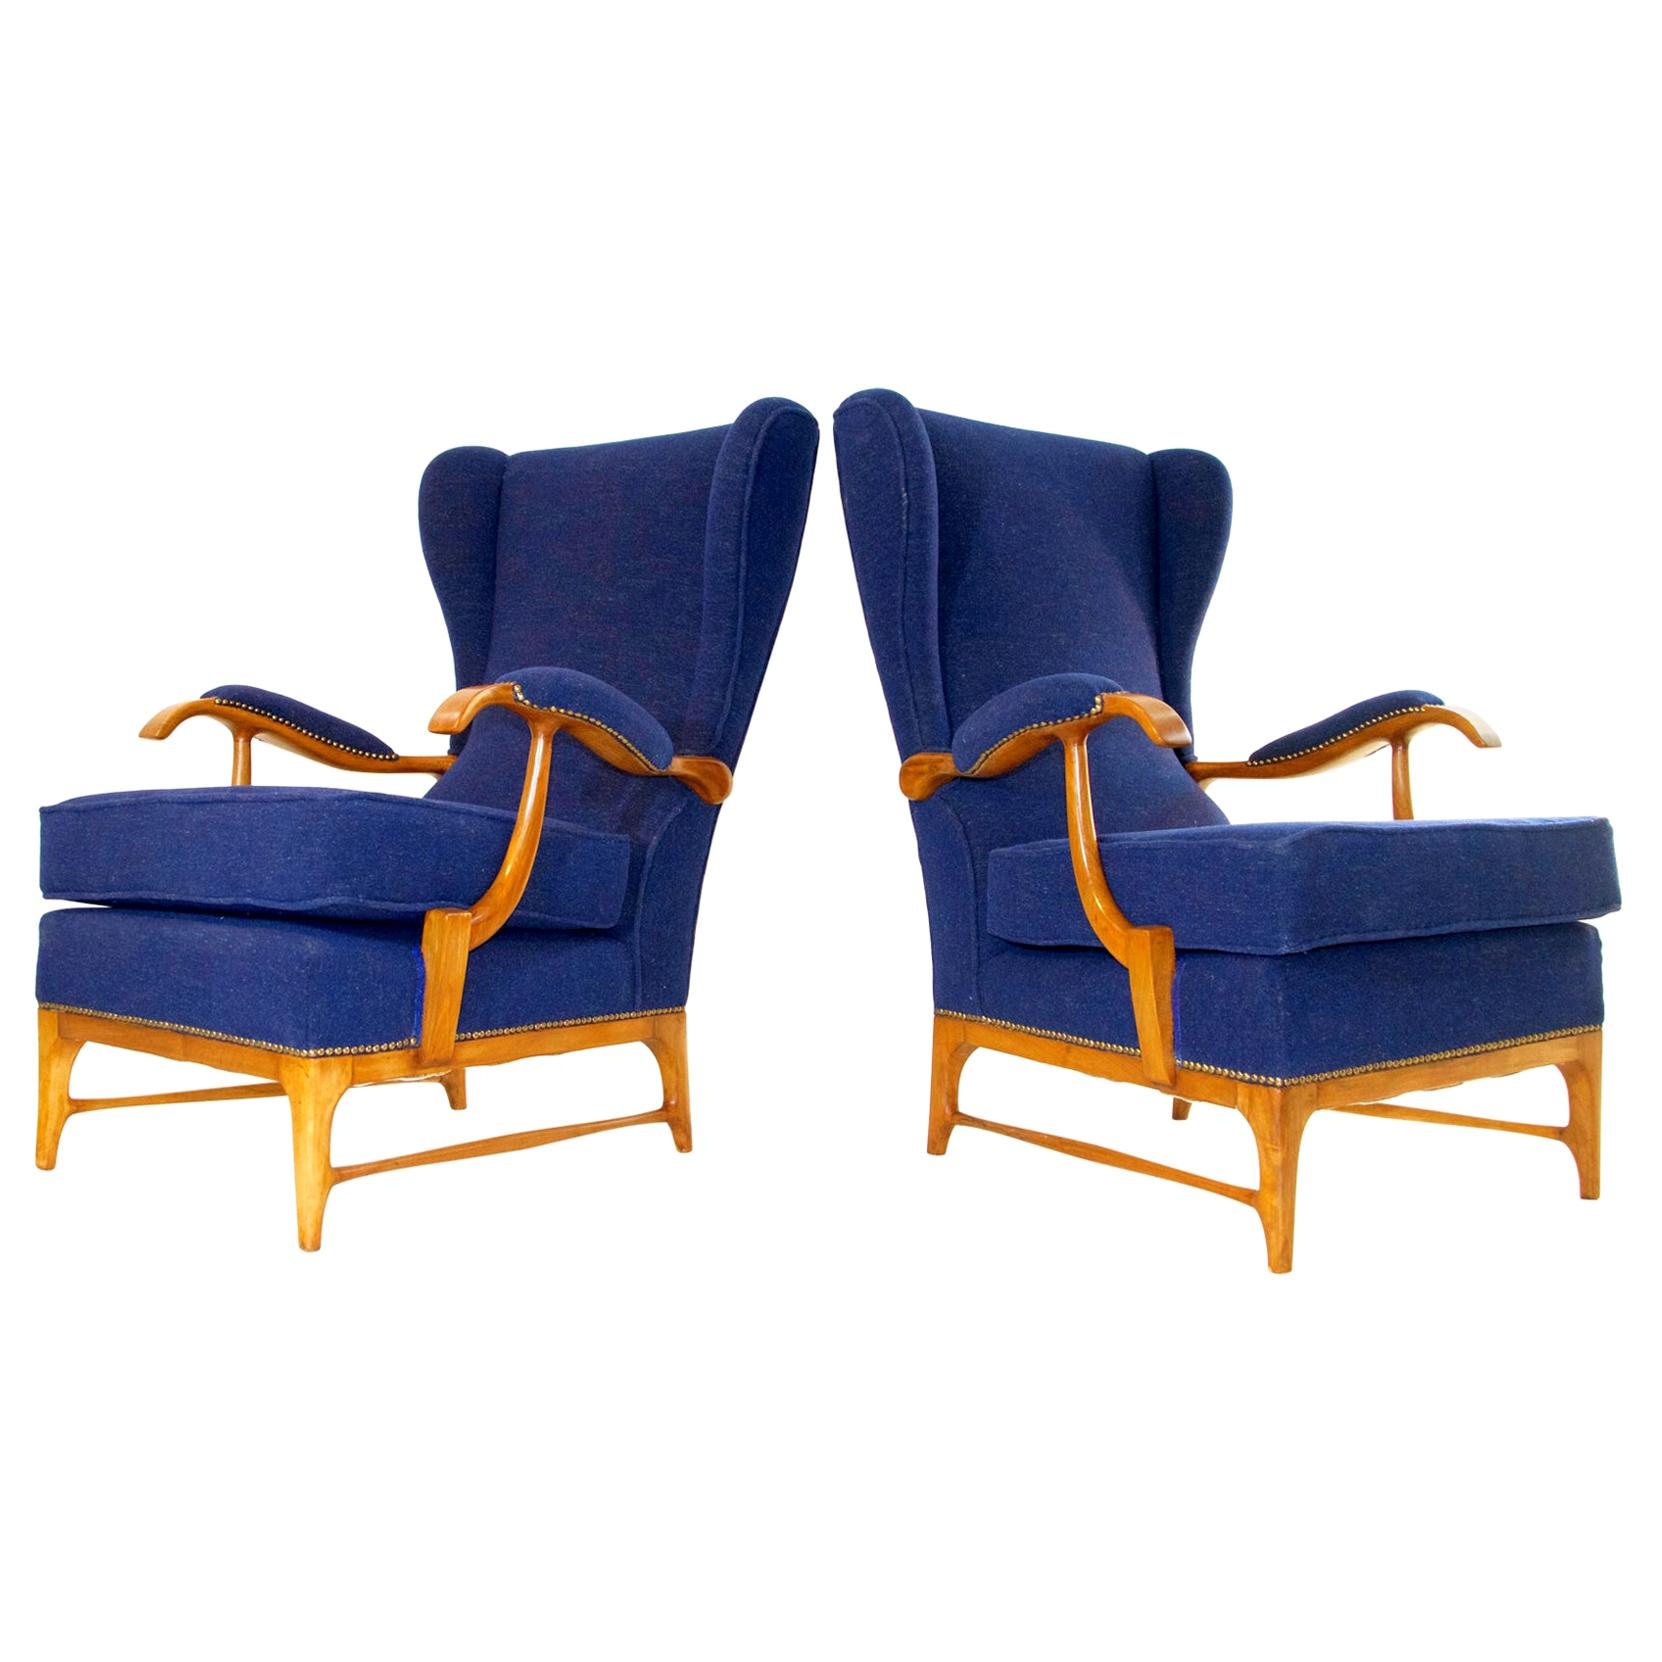 Midcentury Pair of Armchairs in Walnut by Paolo Buffa for Framar Made in Italy